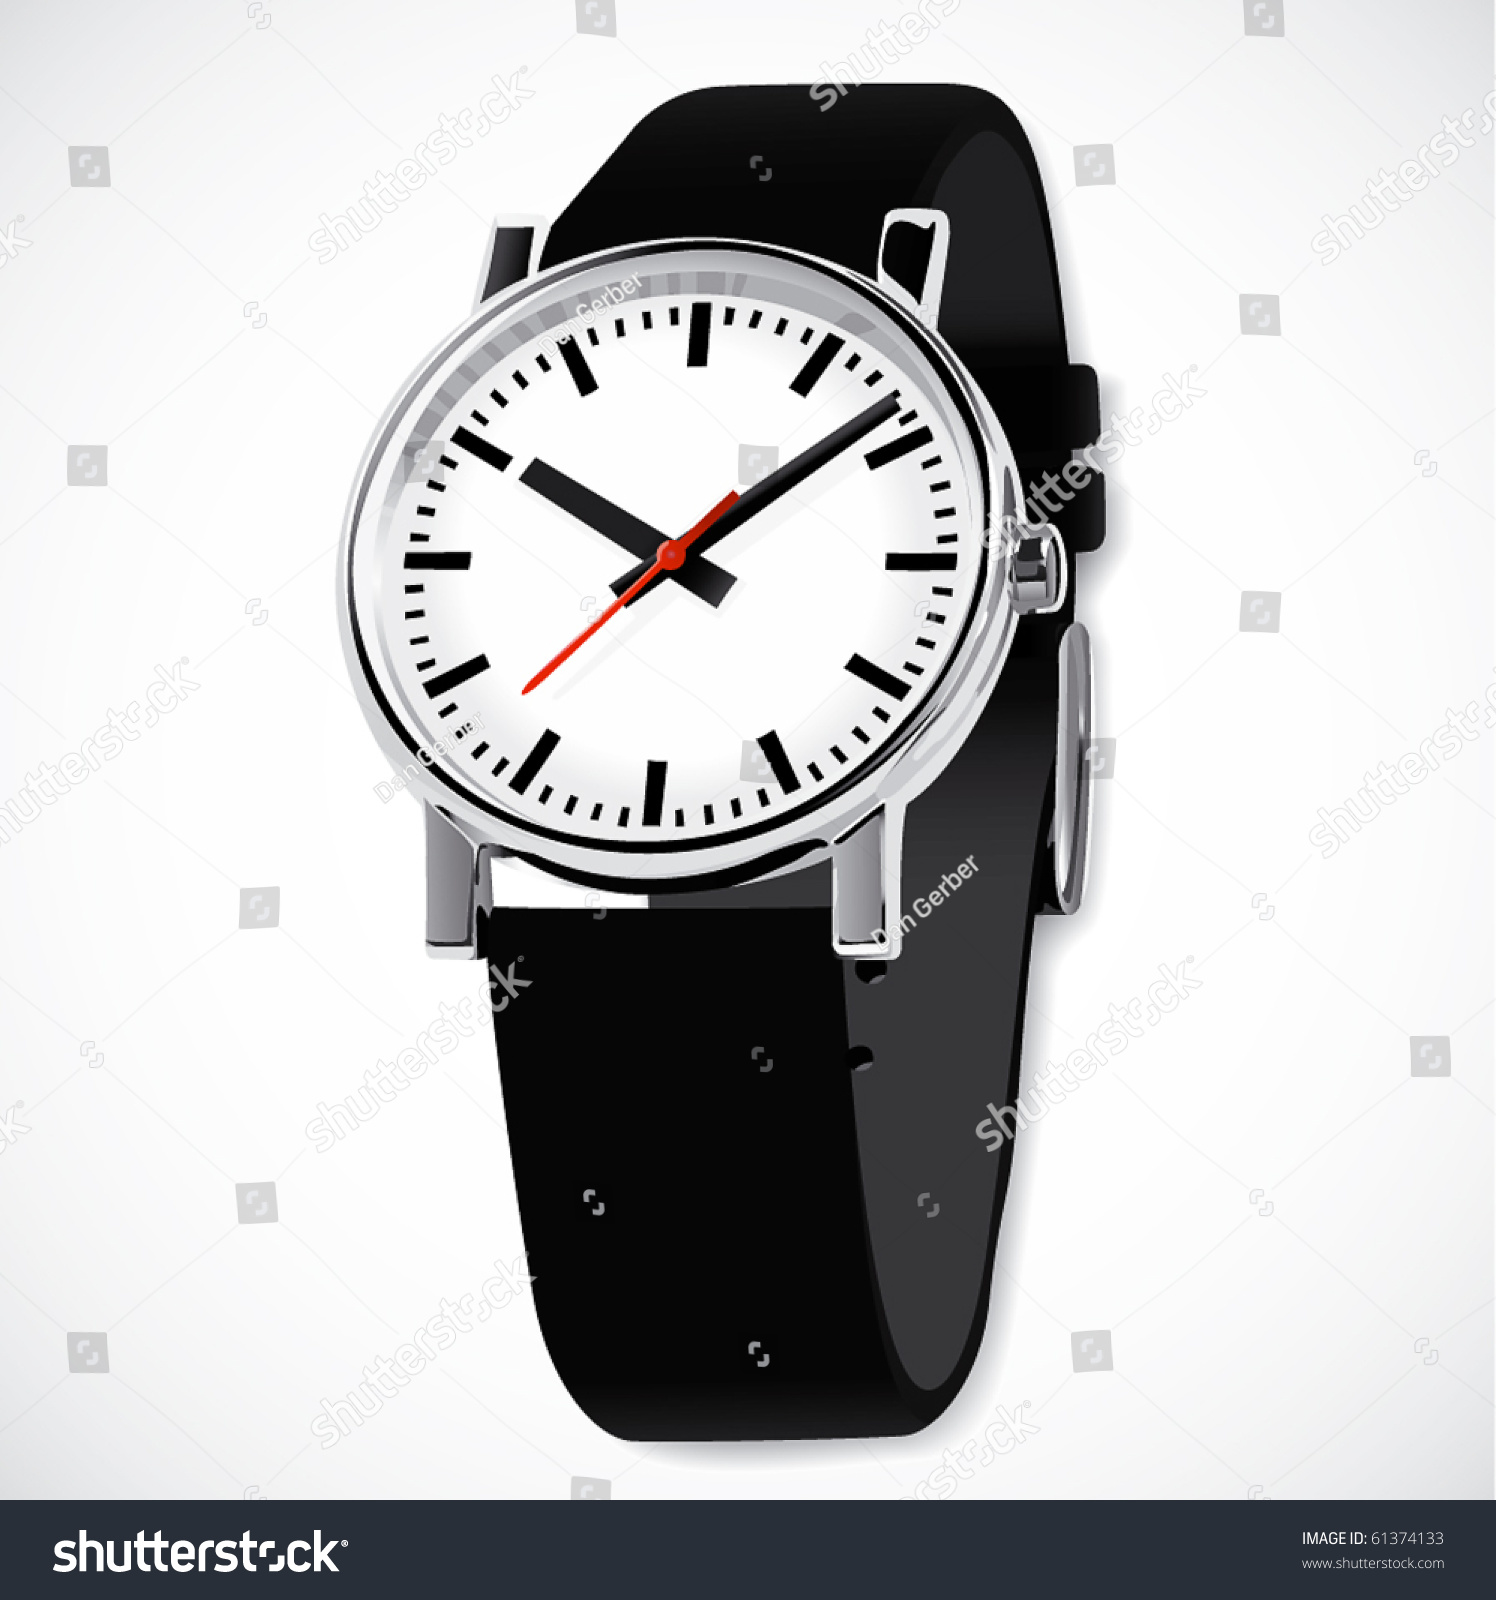 wrist watch clipart black and white - photo #32